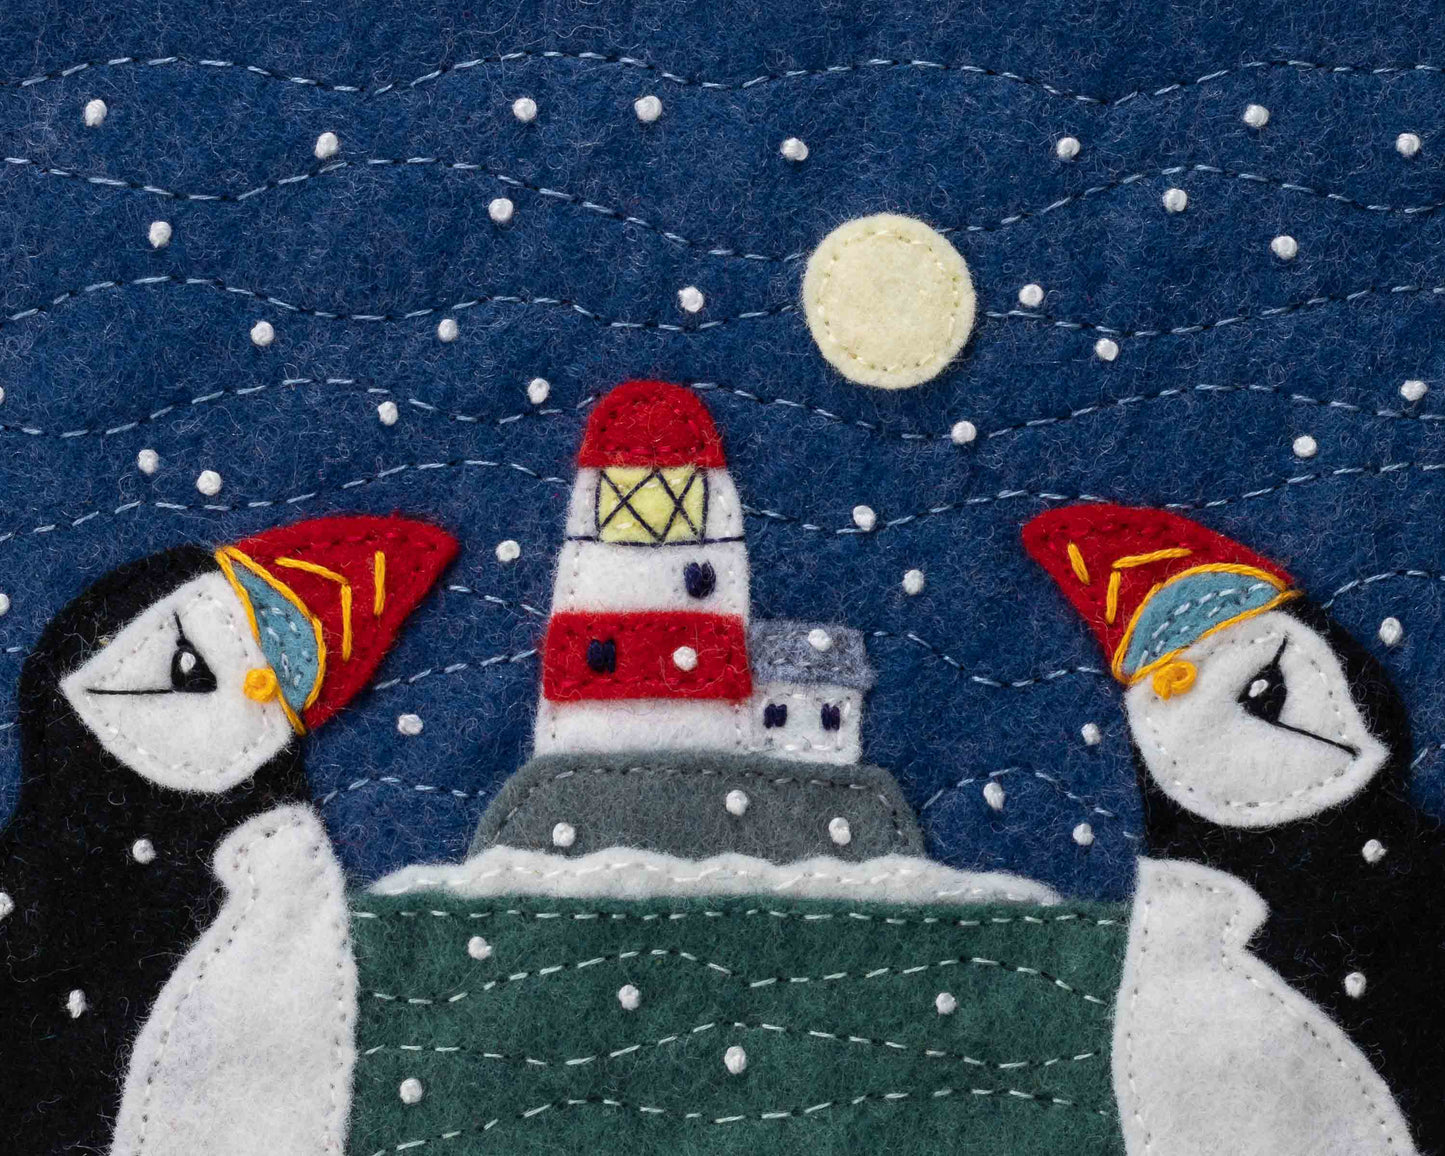 Puffin and Lighthouse Christmas Cards